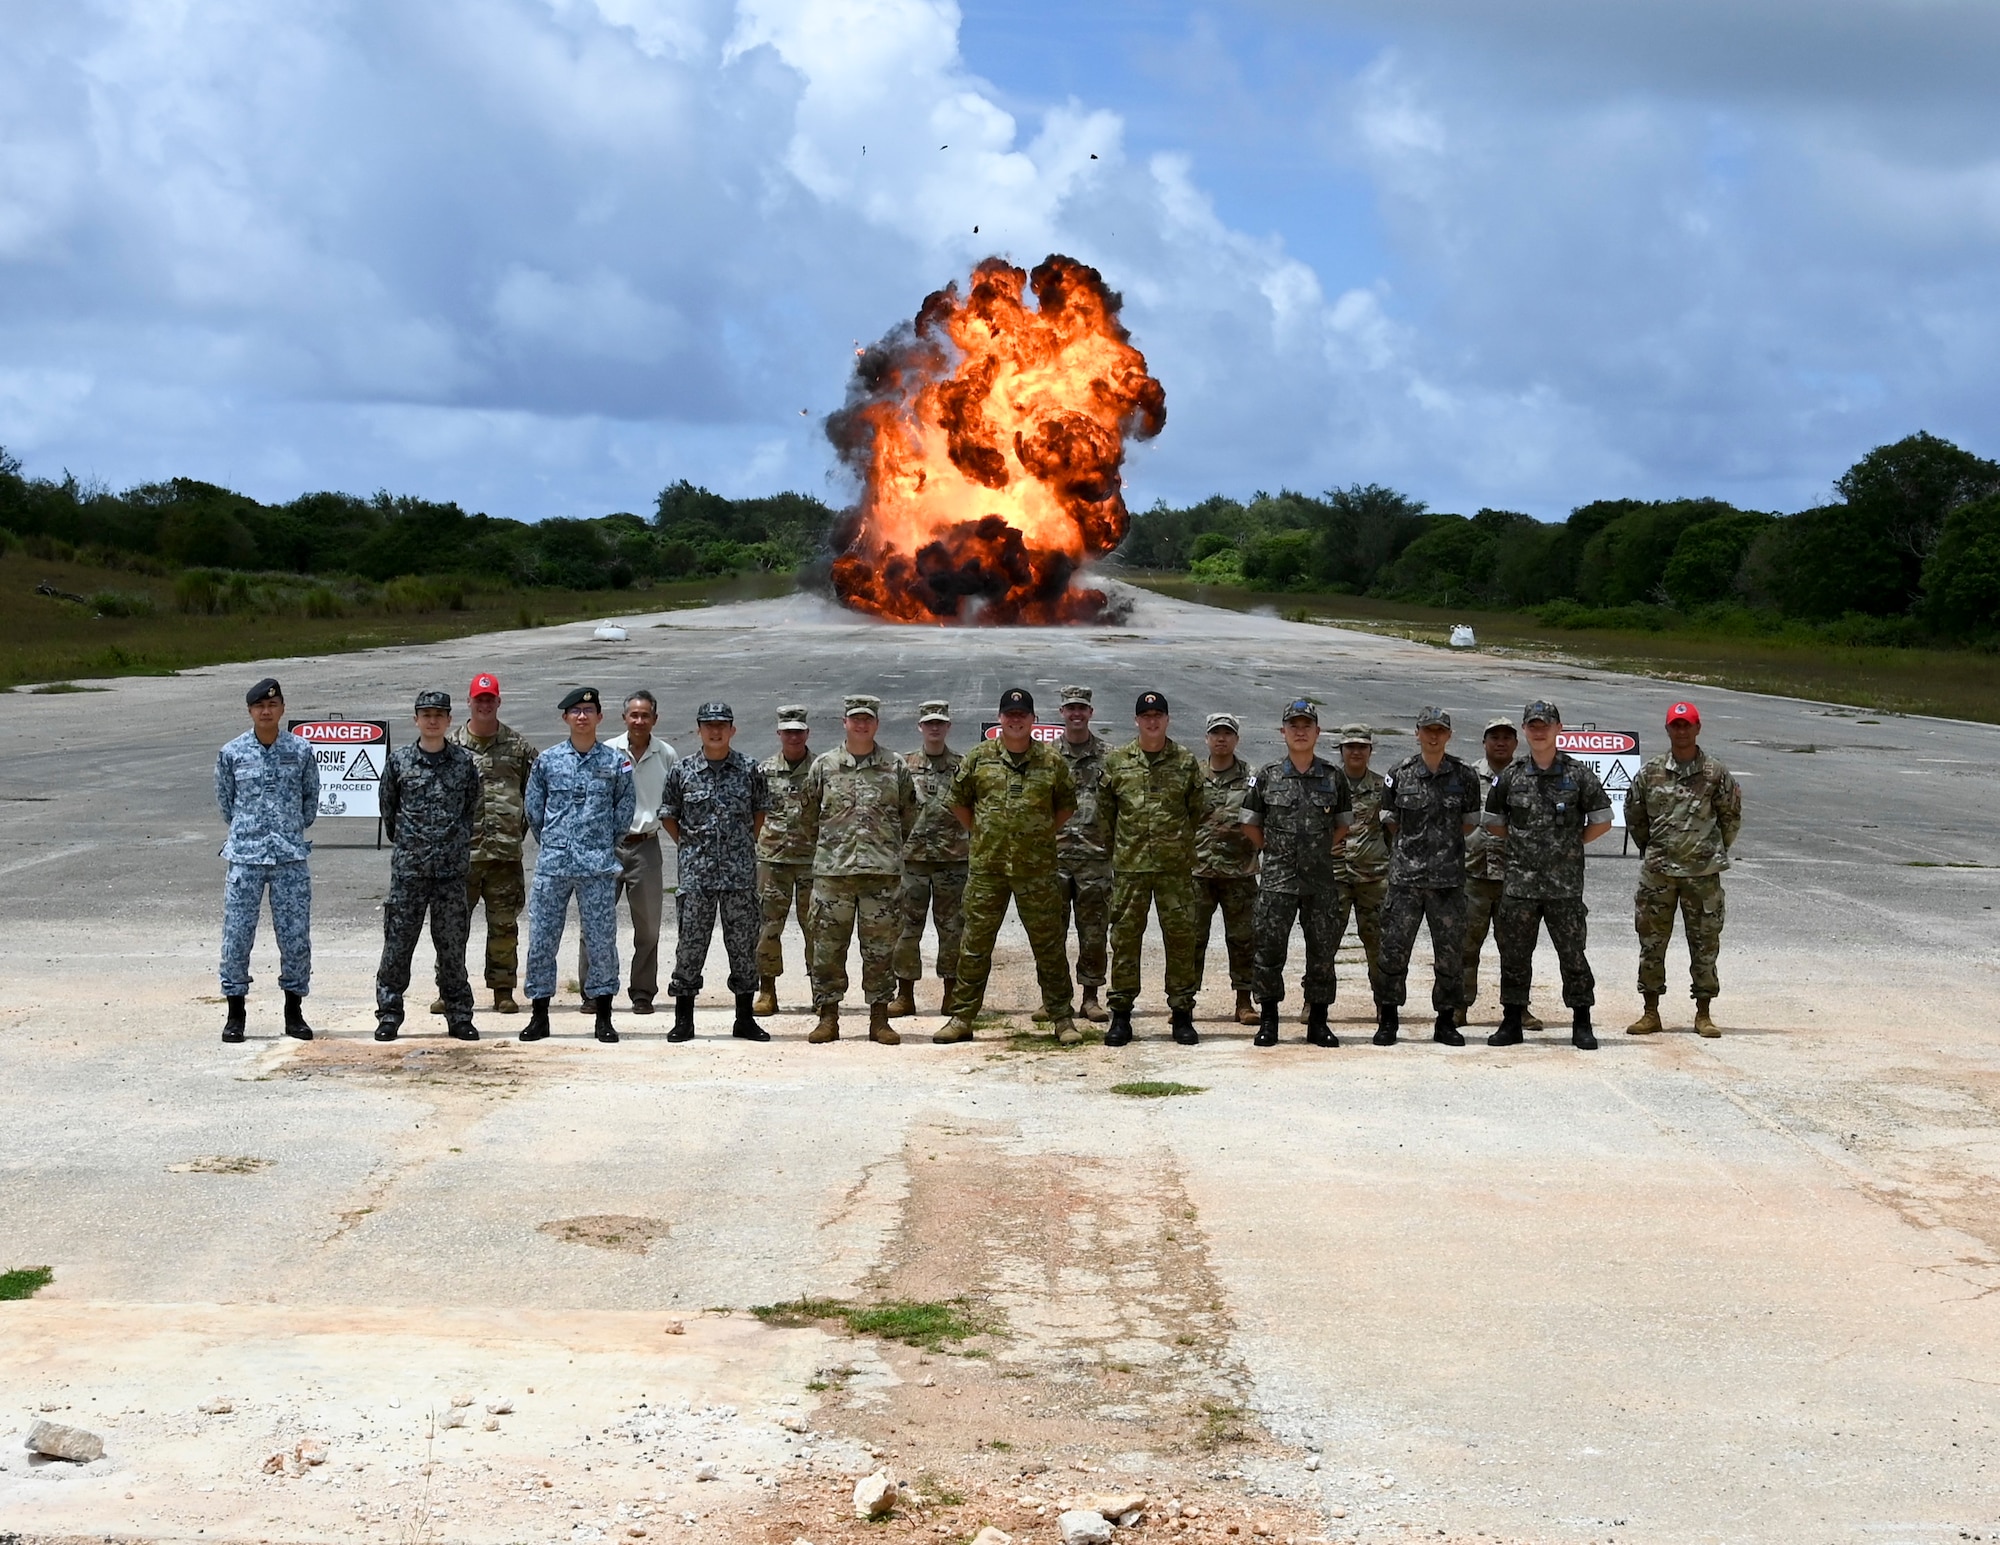 Members of the U.S. Air Force, Royal Australian Air Force, Japan Air Self-Defense Force, Republic of Korea Air Force and the Republic of Singapore Air Force pose for a photo during the Pacific Unity Multi-Lateral Civil Engineer Key Leader Engagement, June 23, 2022 at Andersen Air Force Base, Guam. Themes during this KLE included topics of shared interest across the allies and partners such as joint capabilities, leveraging expertise in the Total Force, and increased frequency of subject matter expert exchanges and multi-lateral training. (U.S. Air Force Photo by Airman 1st Class Emily Saxton)